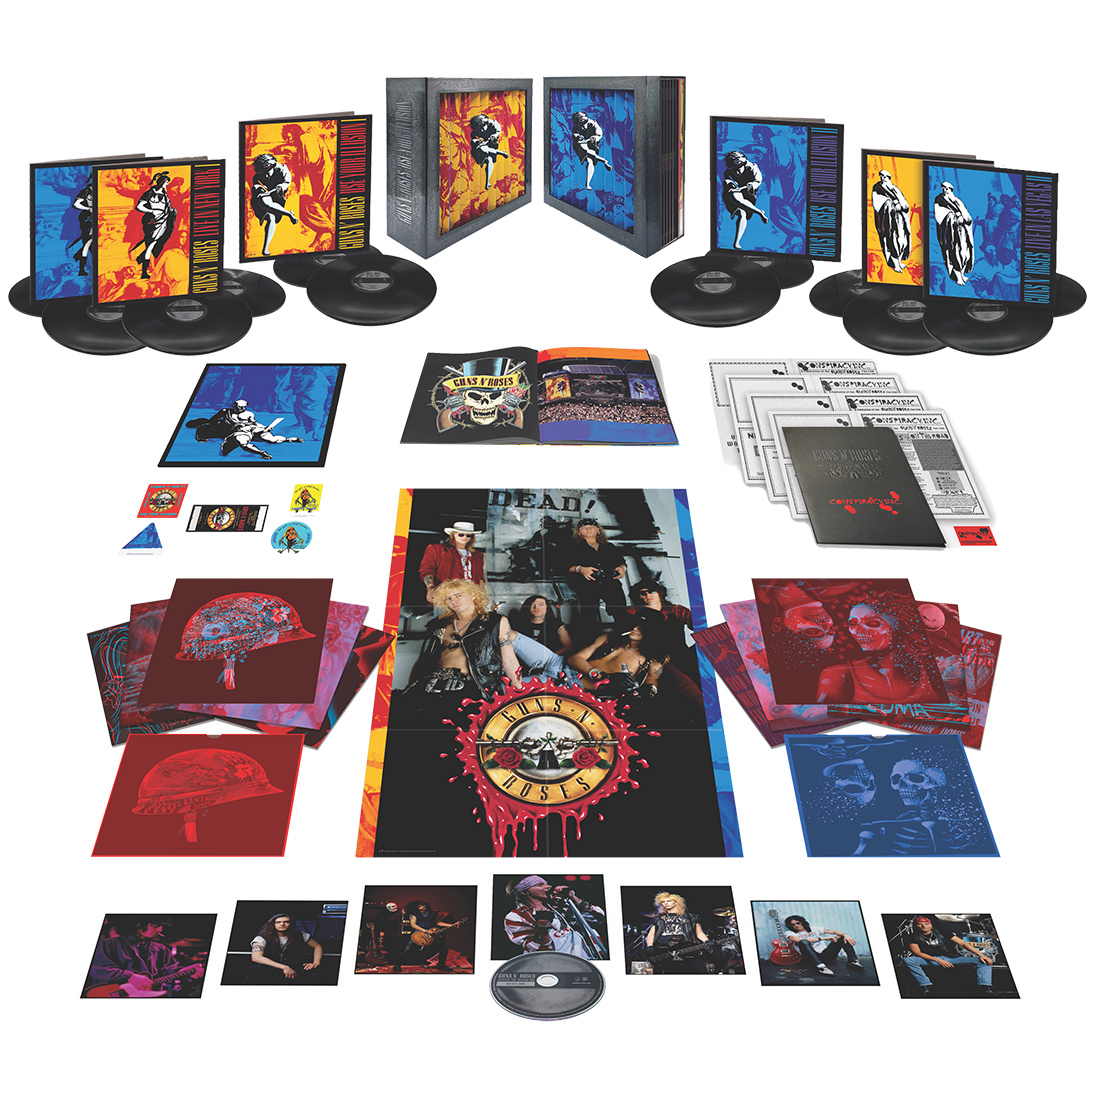 The Use Your Illusion box set to be released on November 11, 2022 Uyi_bo10